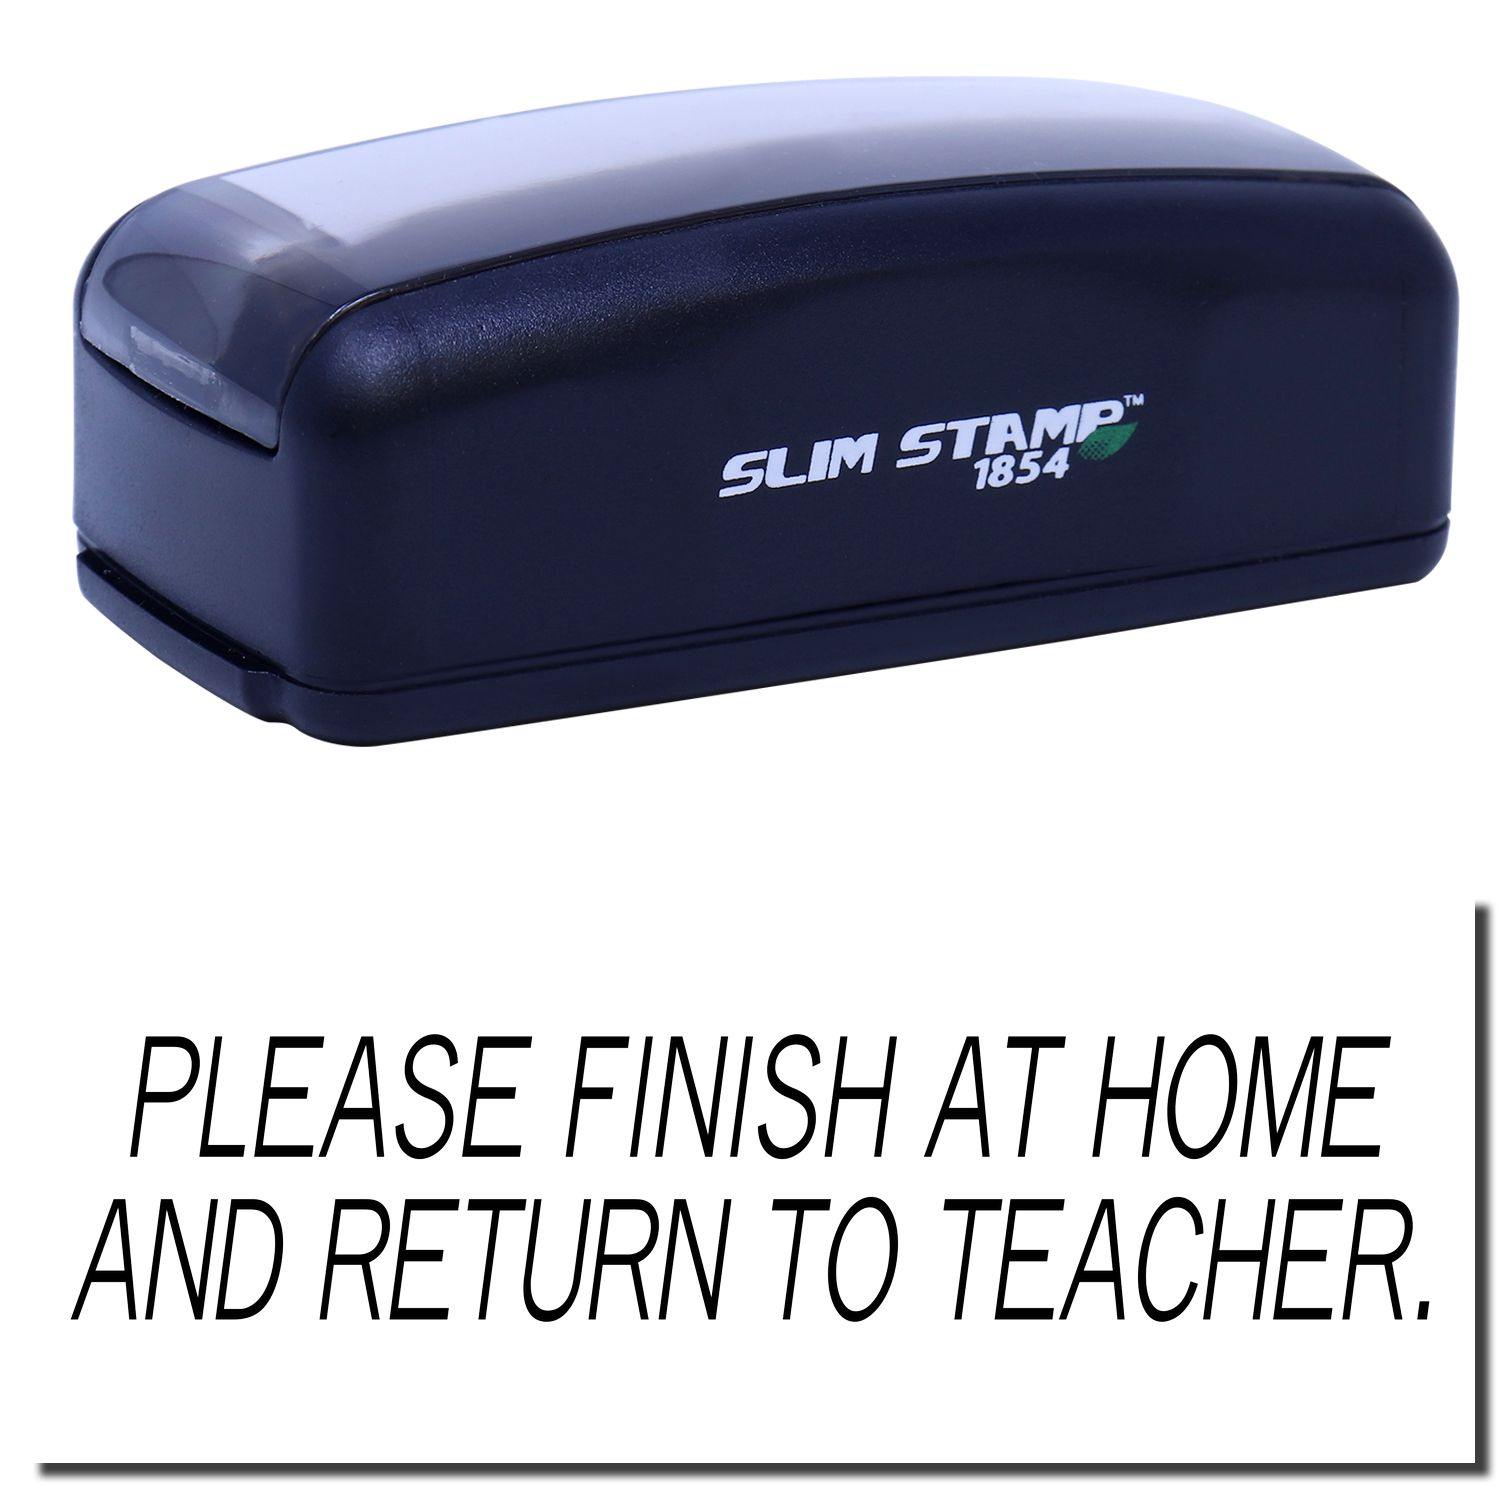 A stock office pre-inked stamp with a stamped image showing how the text "PLEASE FINISH AT HOME AND RETURN TO TEACHER." in a large font is displayed after stamping.